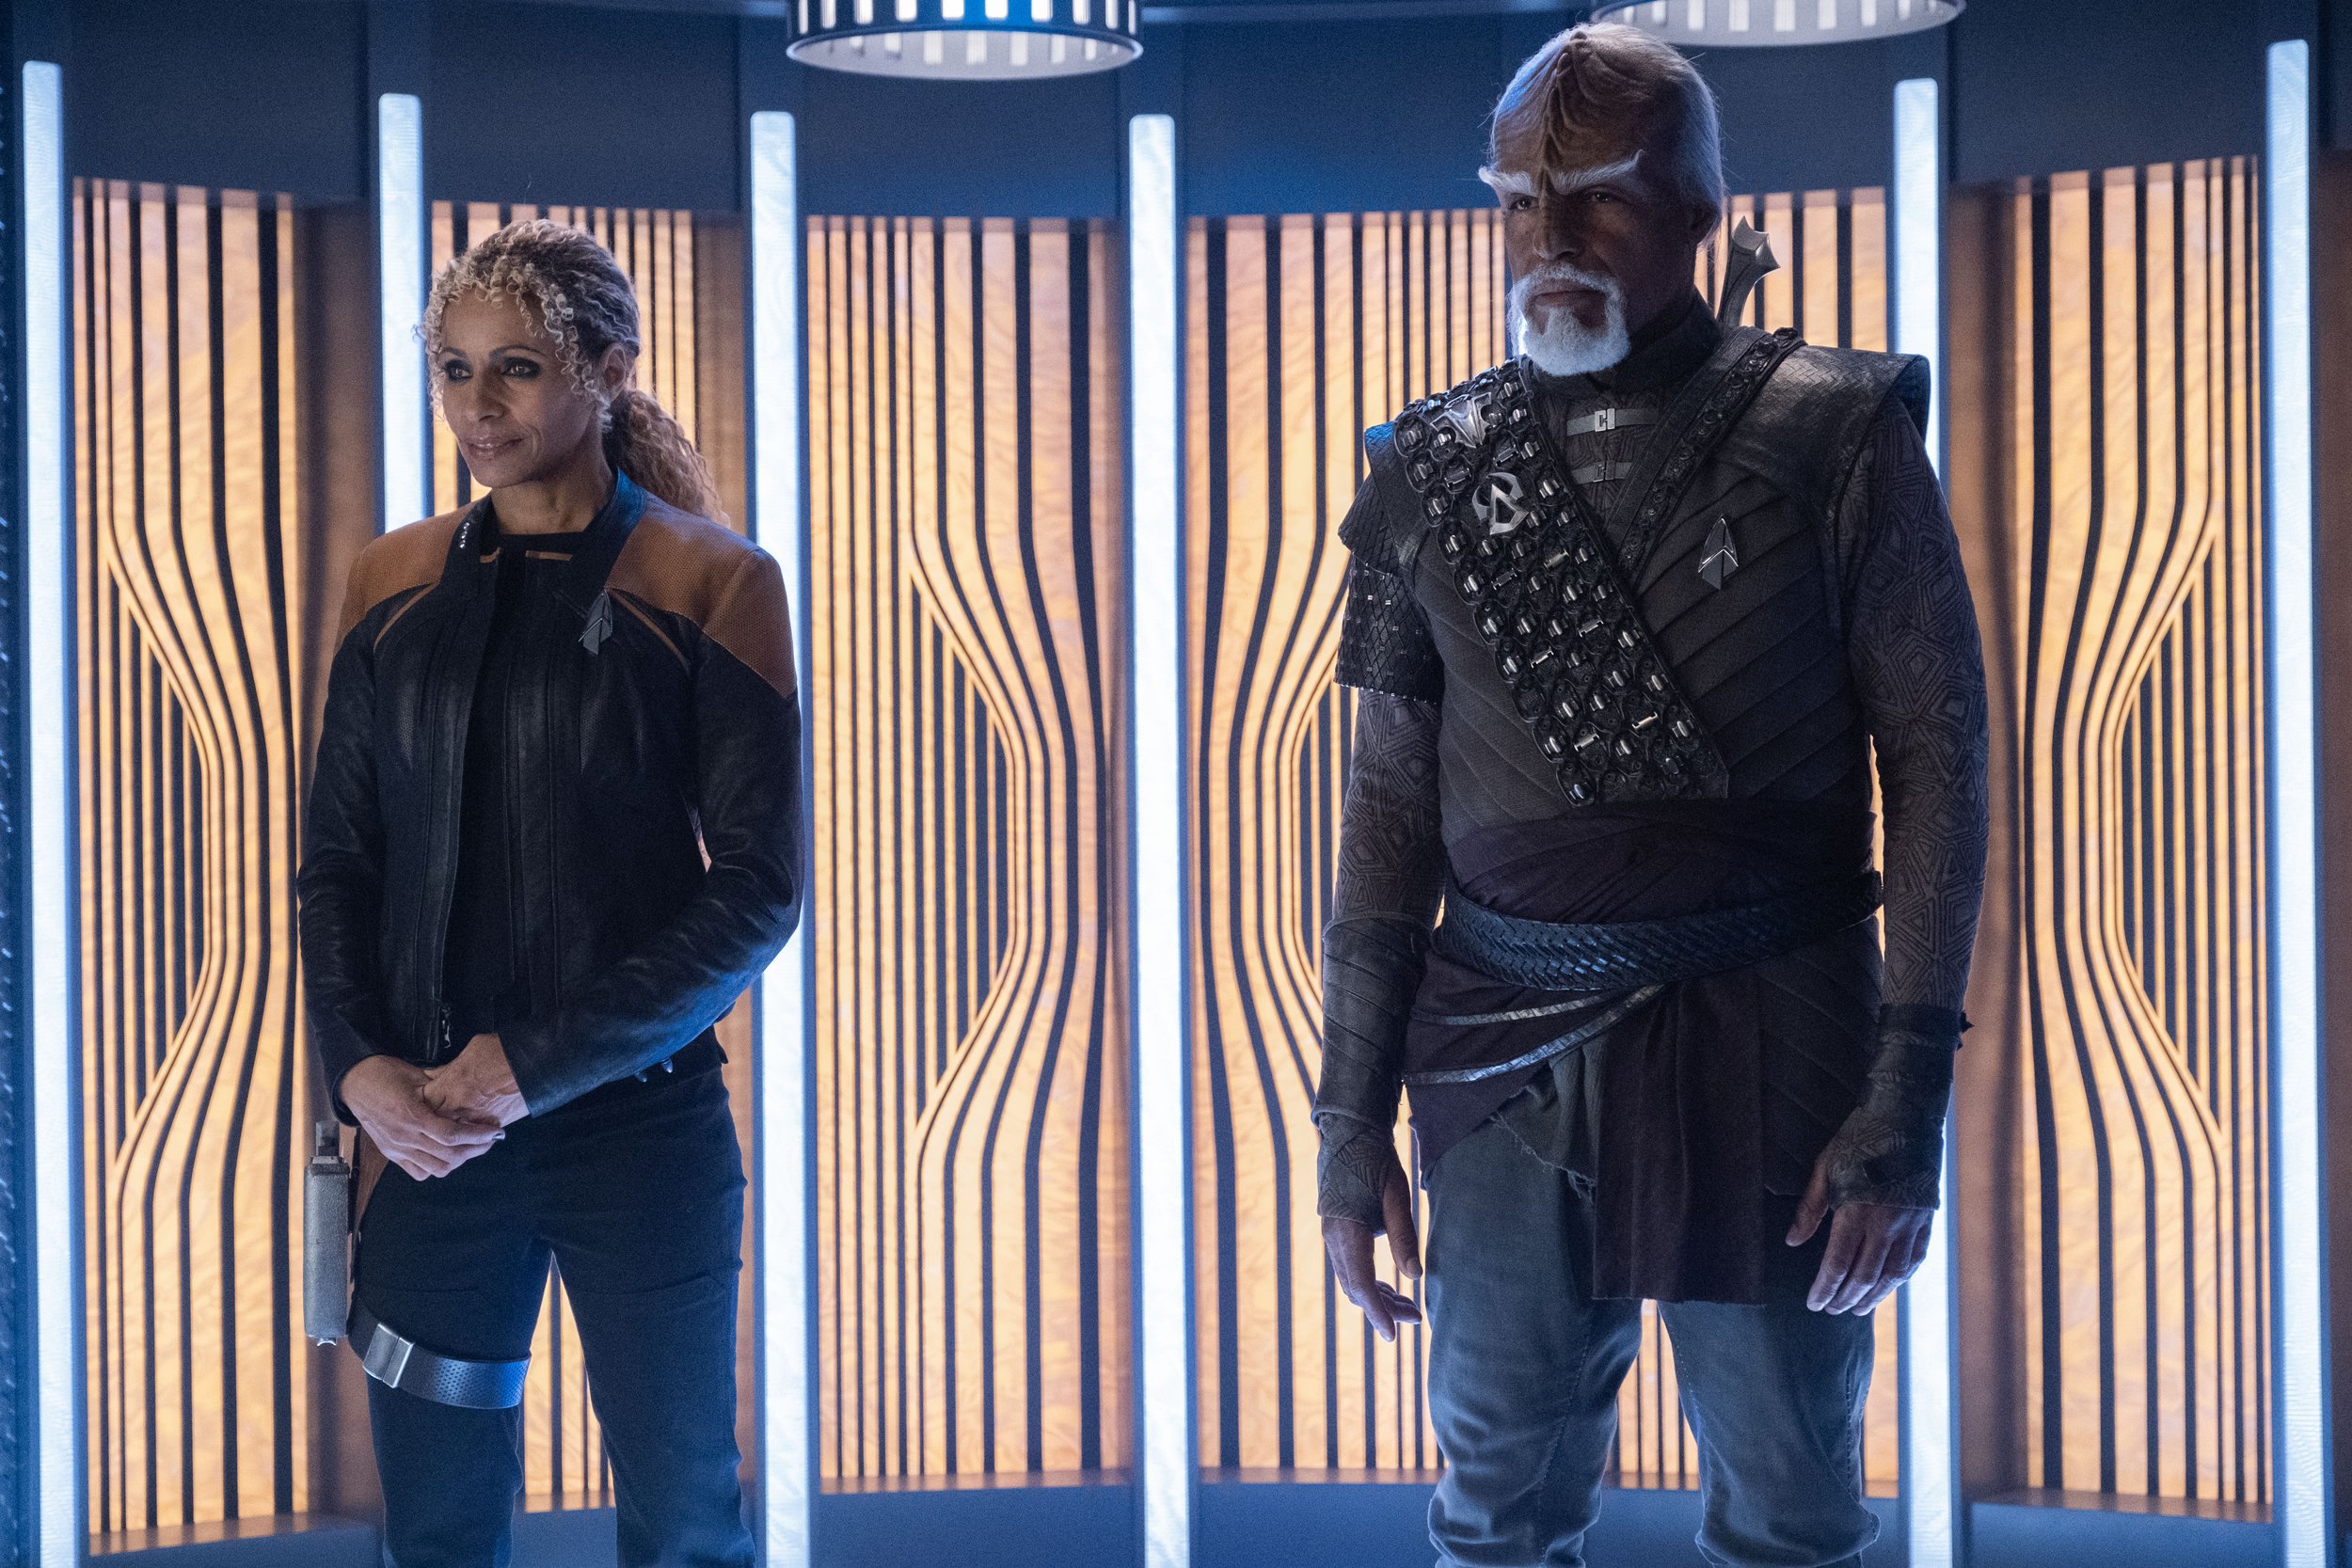   Michelle Hurd  as Raffi Musiker and  Michael Dorn  as Worf.  Photo Credit: Trae Patton/Paramount+.  